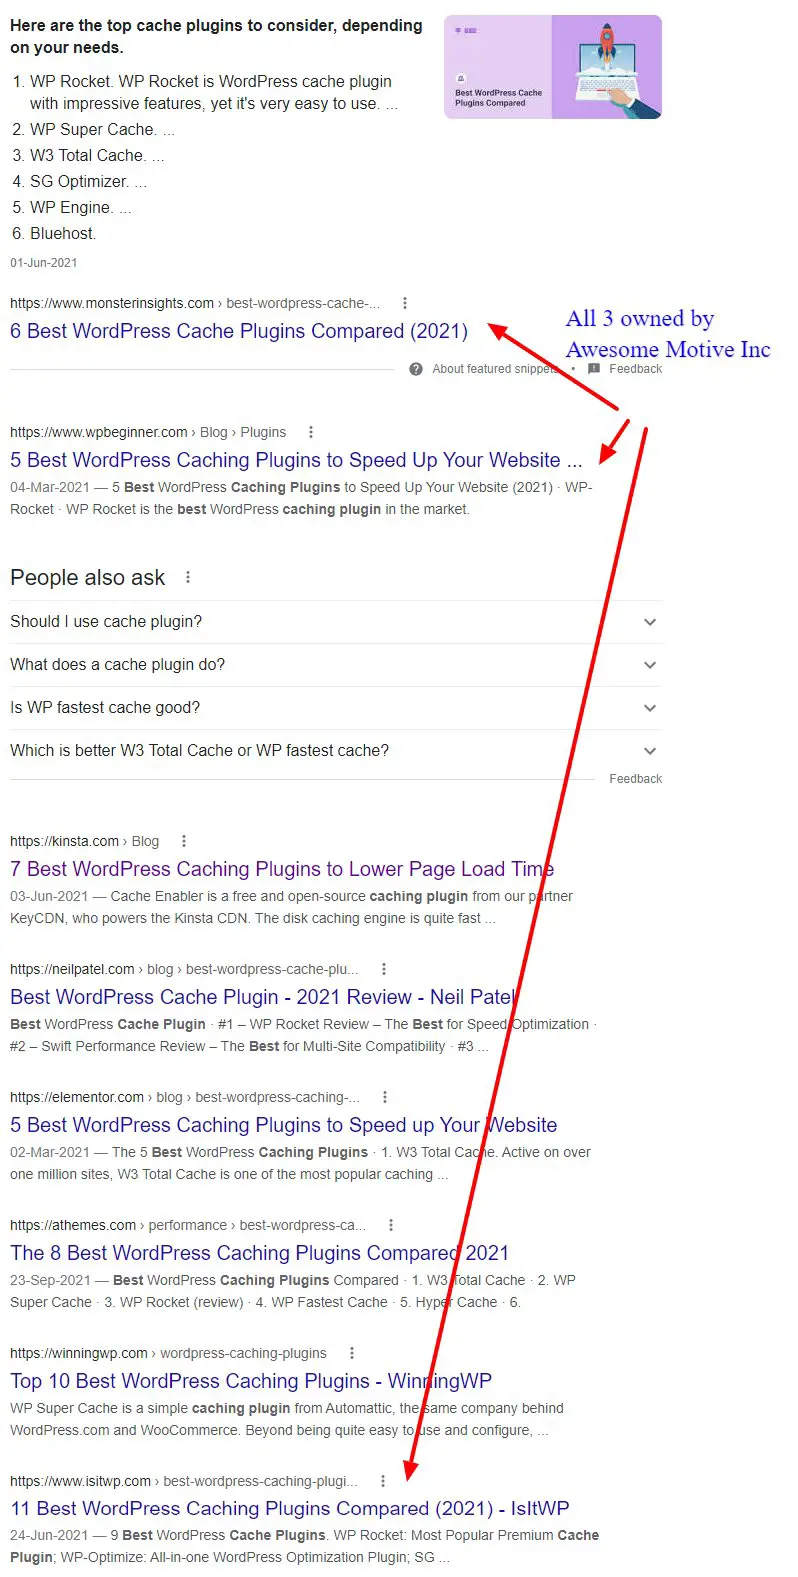 Is PBN good for SEO?